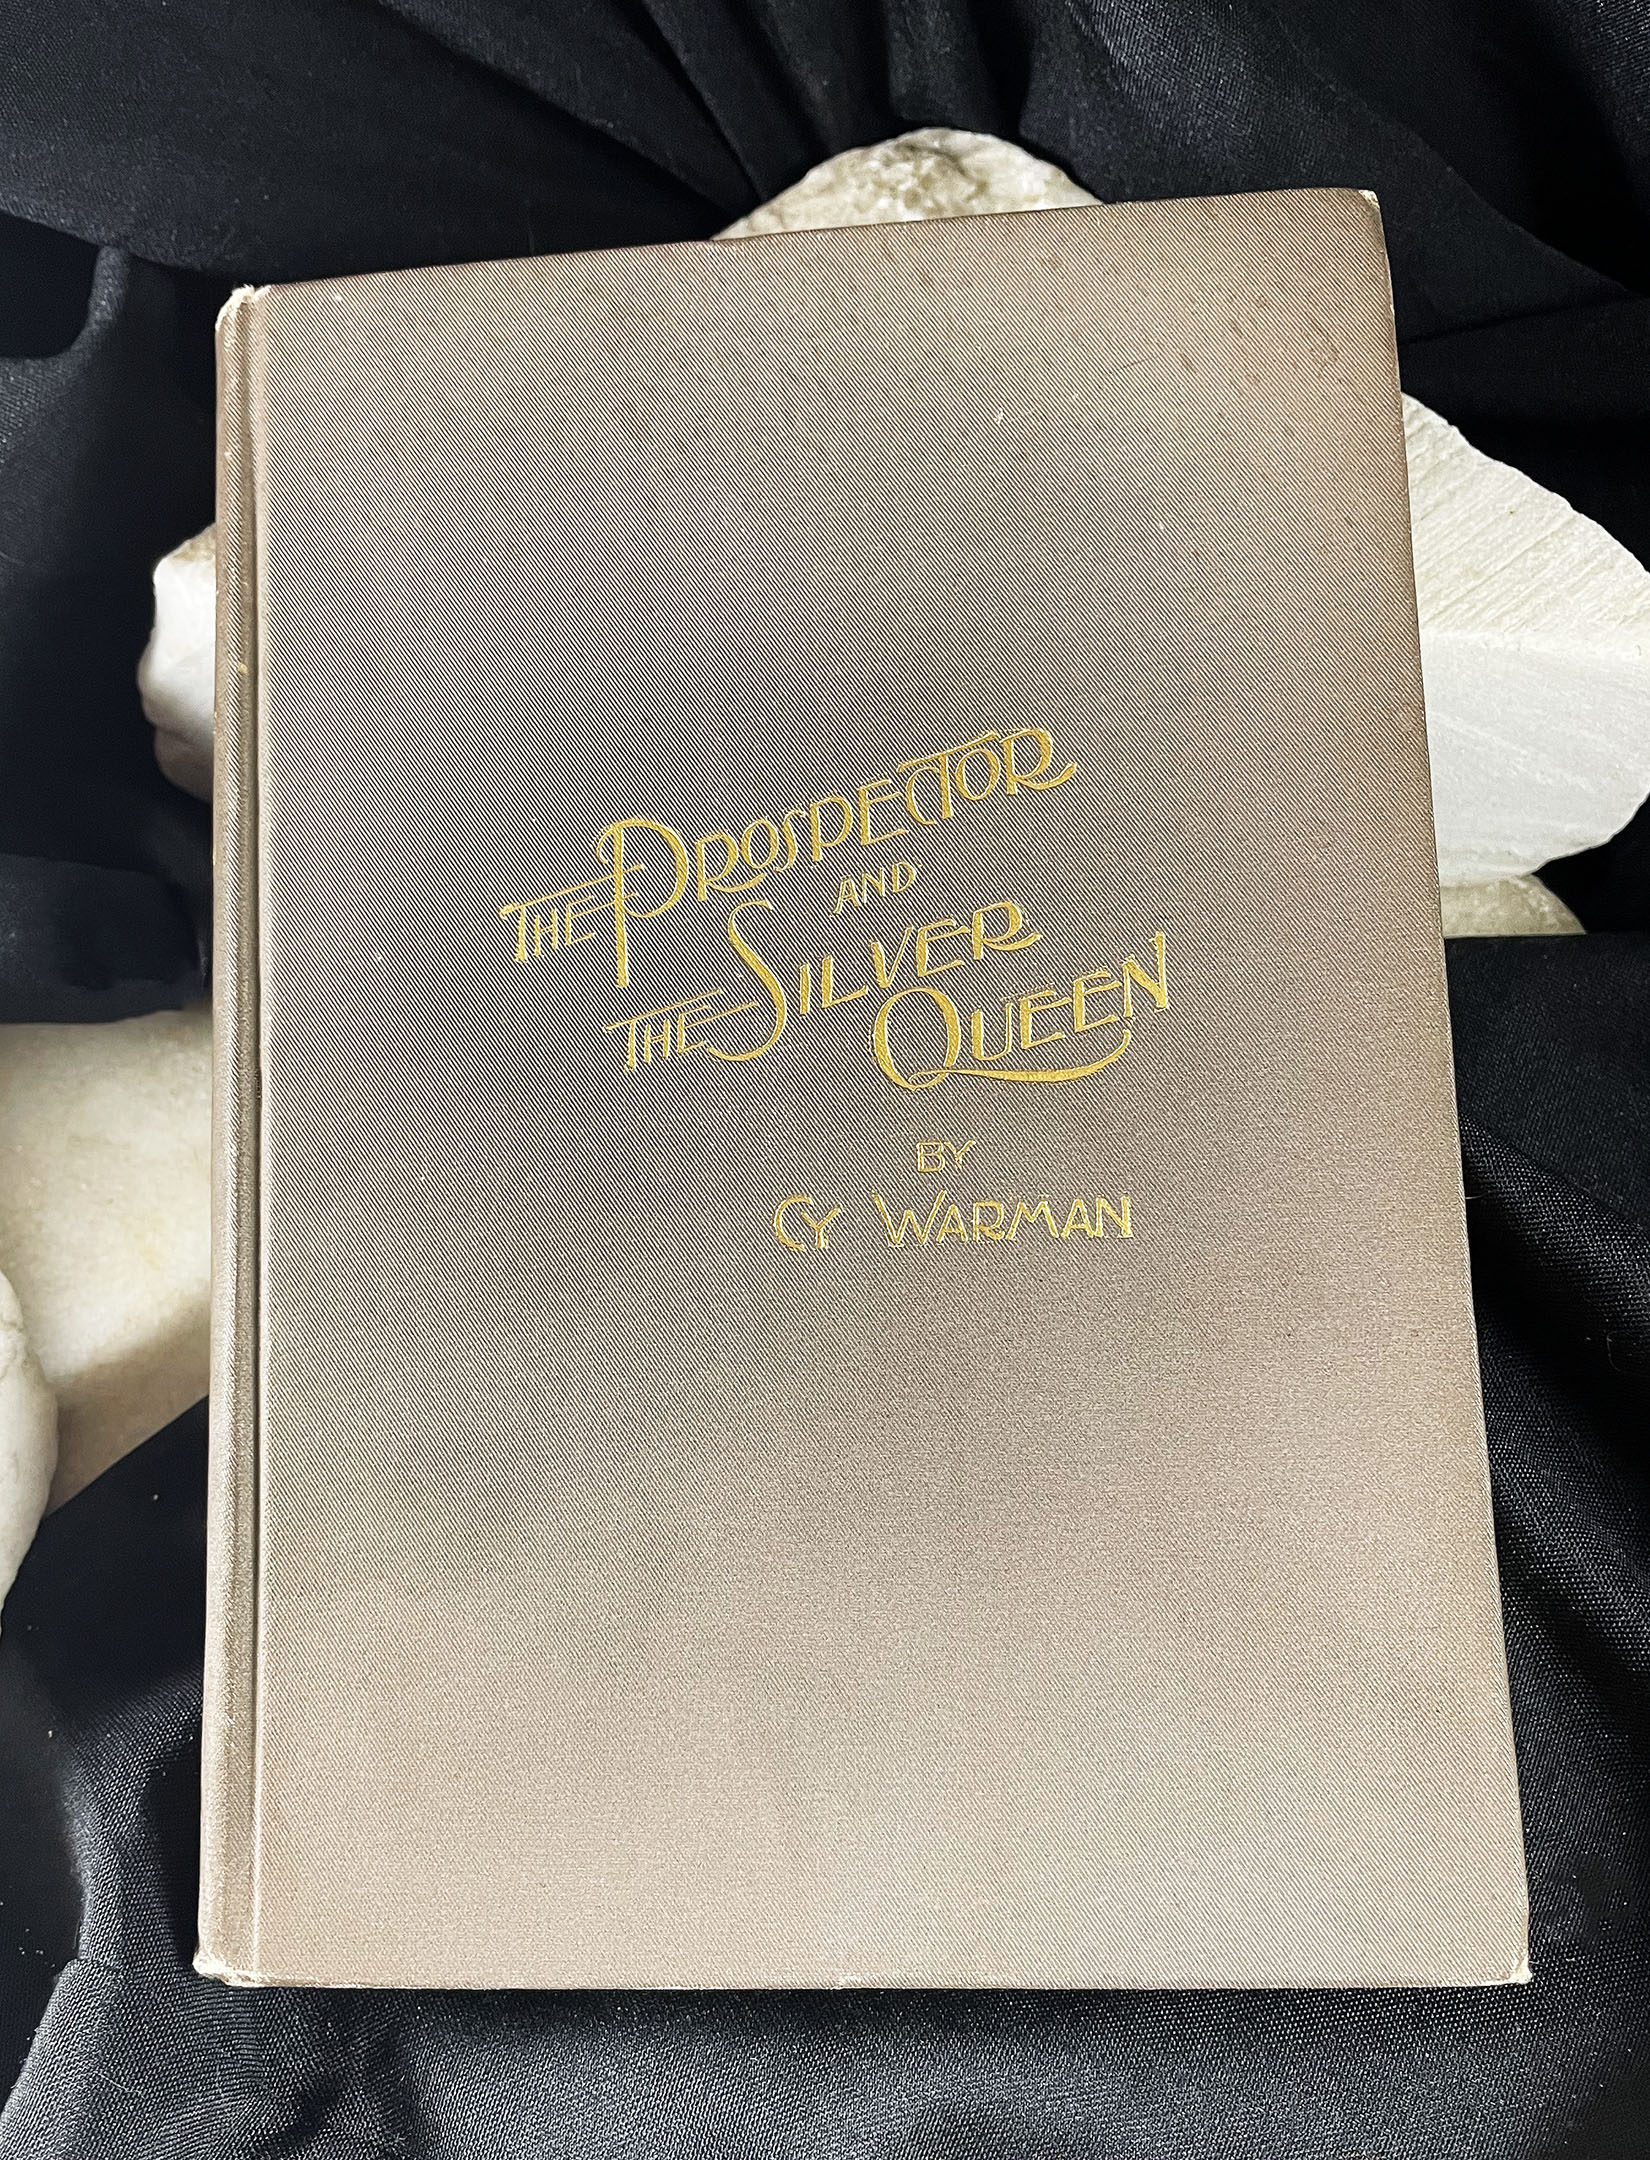 PROSPECTOR AND THE SILVER QUEEN by Cy Warman, Story of Nicholas C. Creede and Creede Silver Mining District Colorado 1894 inscribed first edition